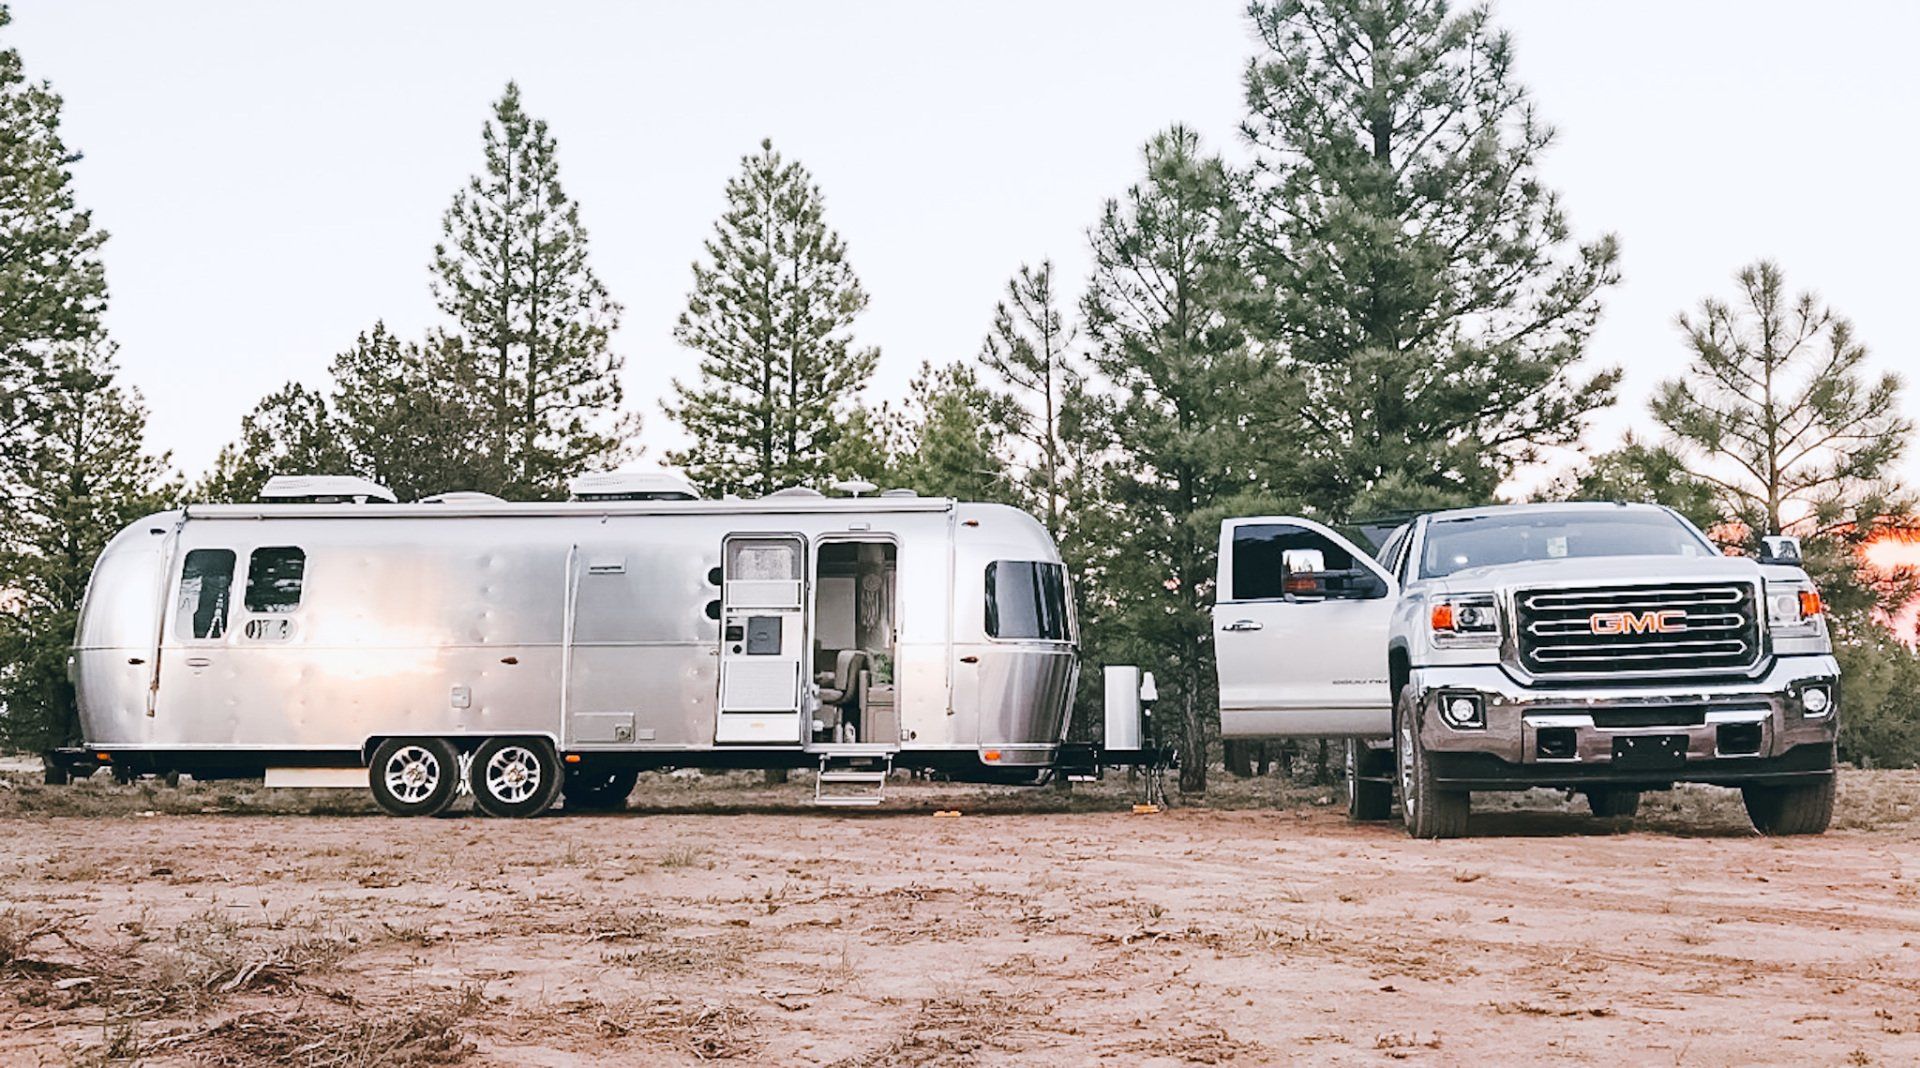 Full Time RV Living in an Airstream travel trailer free camping outside of Bryce Canyon National Park